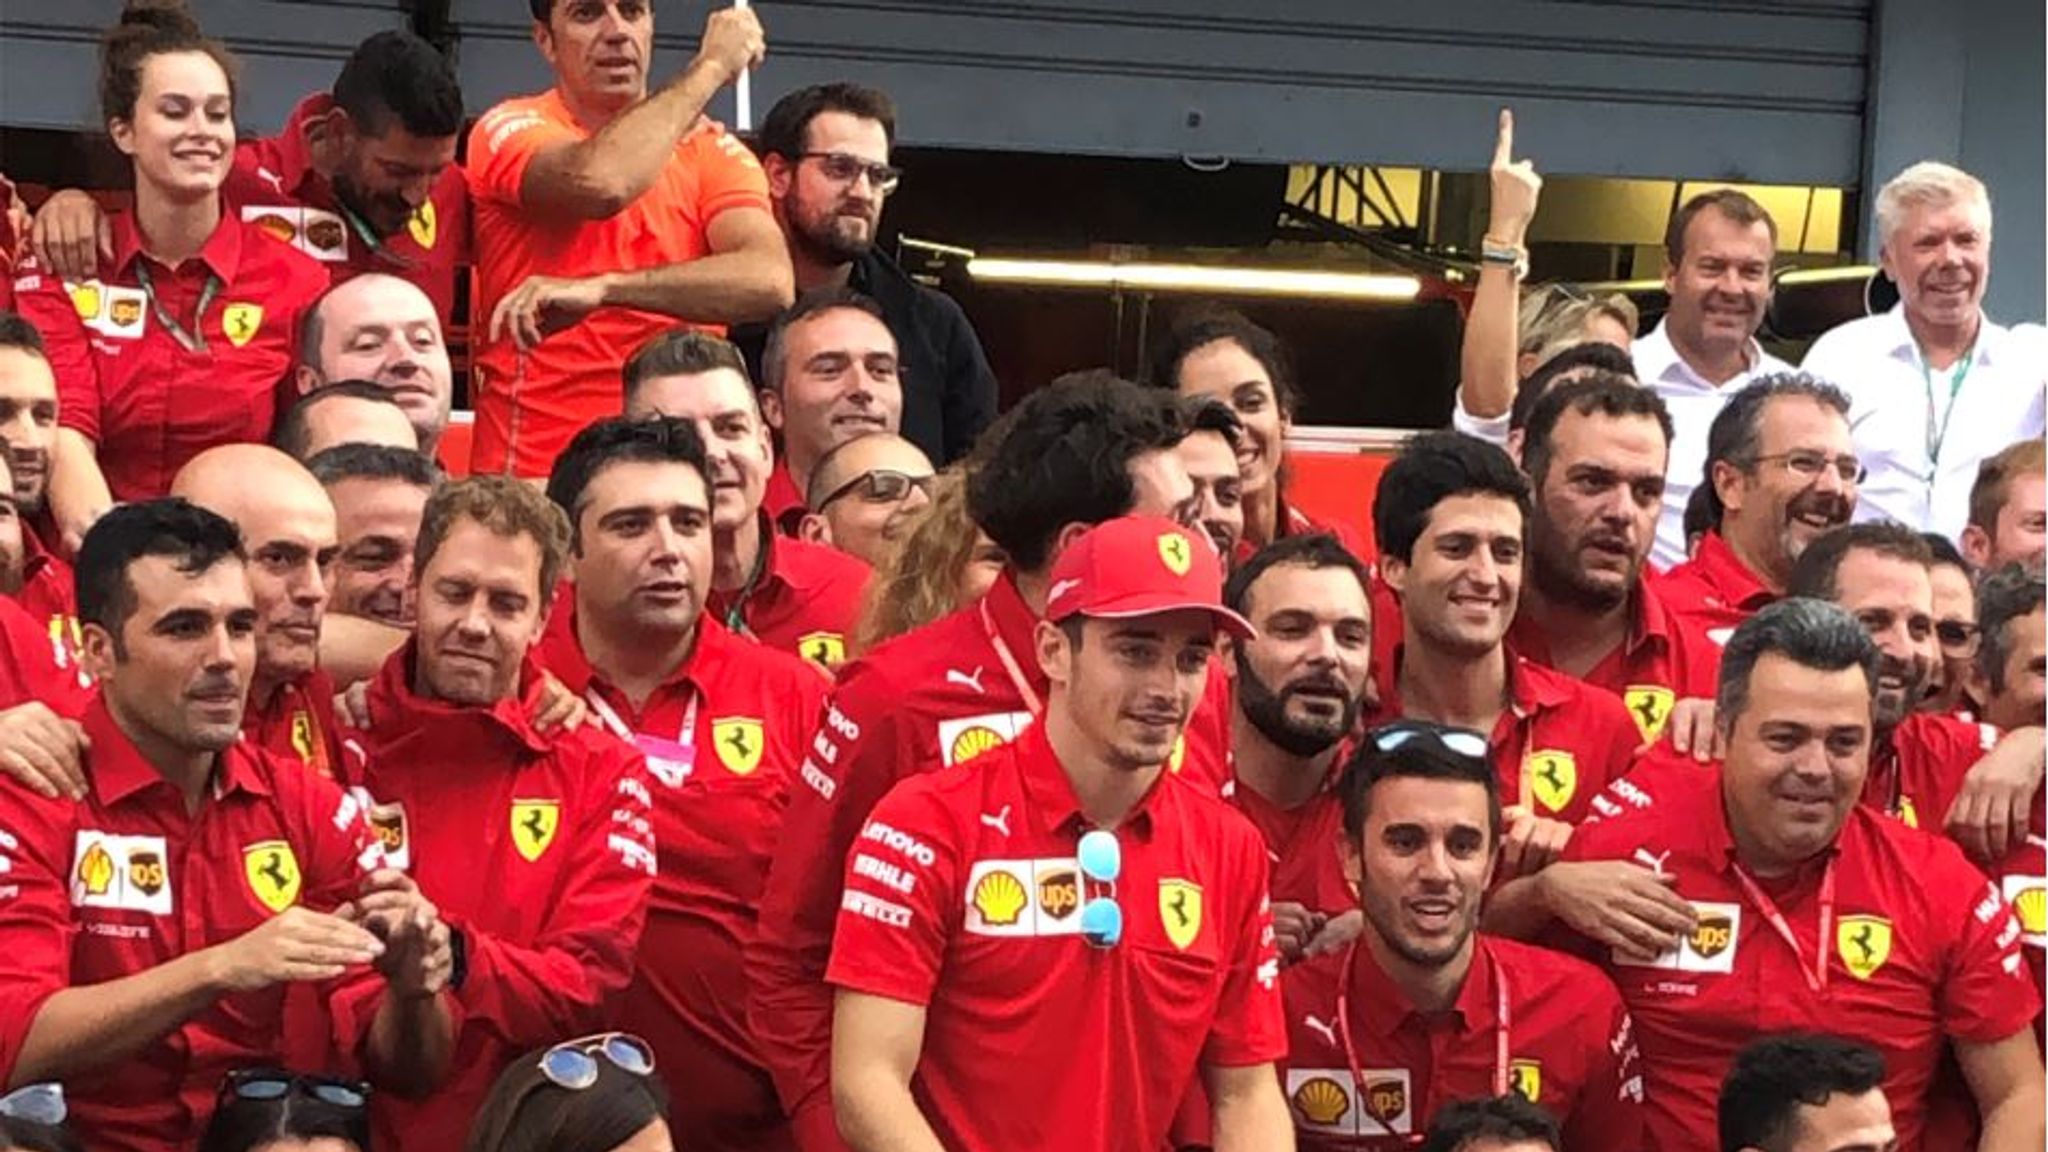 Charles Leclerc Fan Page on X: The Spa and Monza trophies in Maranello  during the celebrations with the team yesterday ❤️ @Charles_Leclerc  driving Ferrari SF90 📸 : marrinergrant (IG) #F1 #Charles16   /